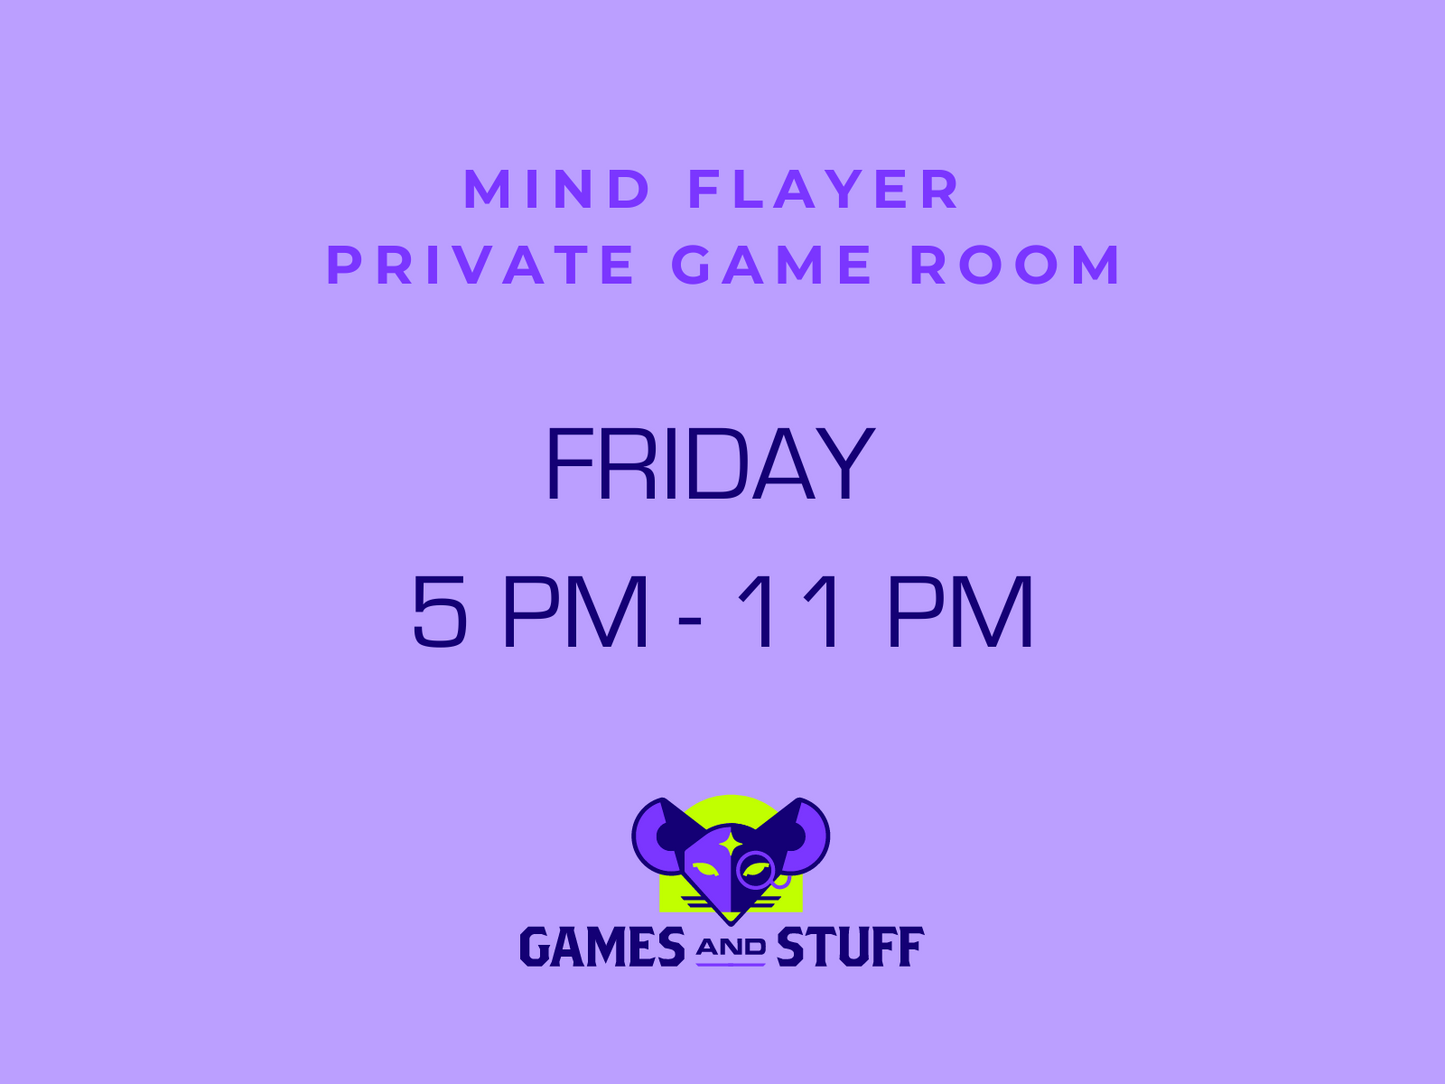 MIND FLAYER PRIVATE GAME ROOM - FRIDAY EVENING